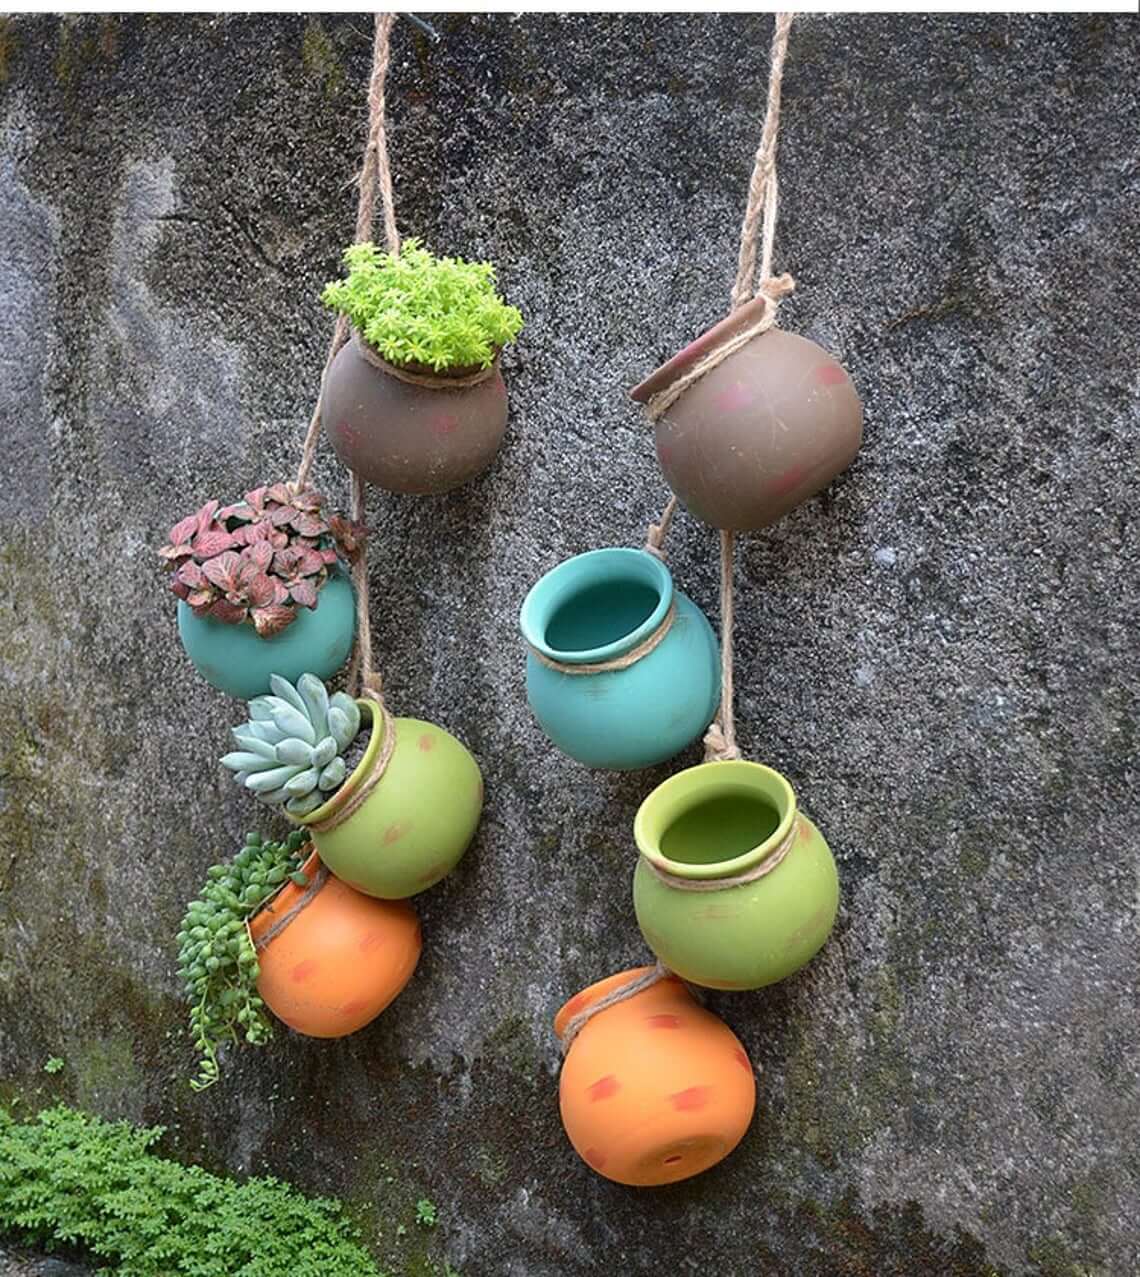 3 Ways To Have More Appealing Outdoor Wall Planters